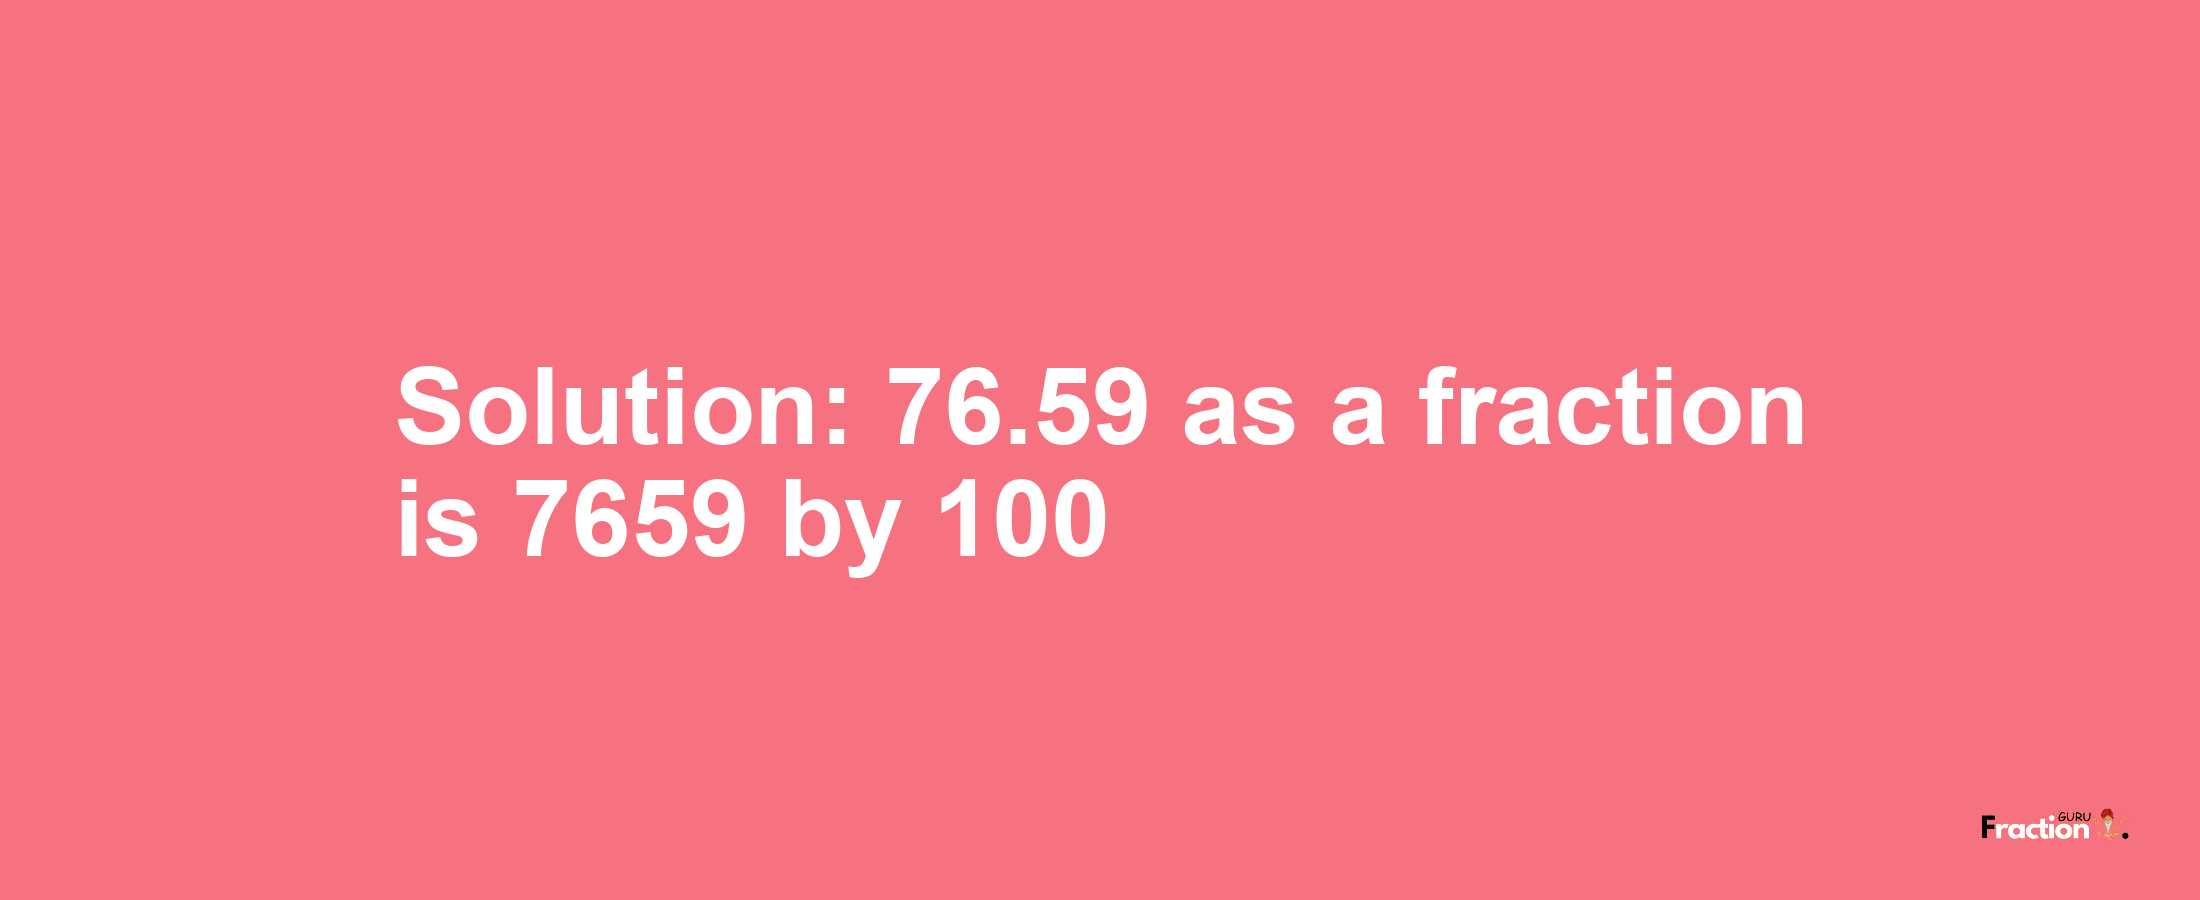 Solution:76.59 as a fraction is 7659/100